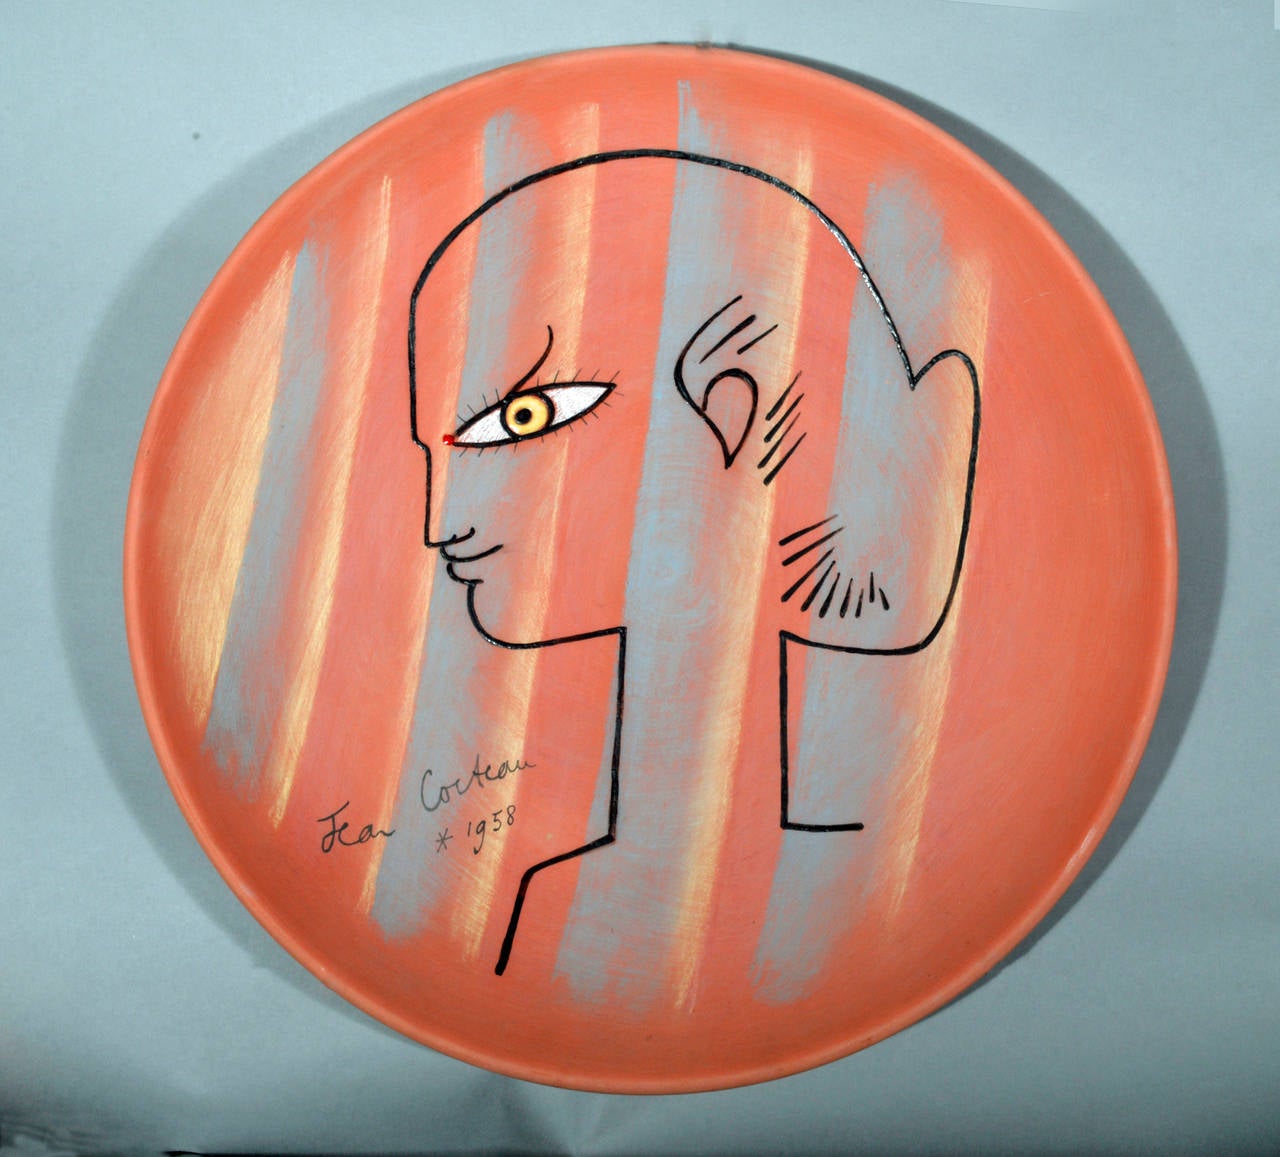 Number seven of 30.

Painted and partially glazed terracotta dish.

With original illustrated 